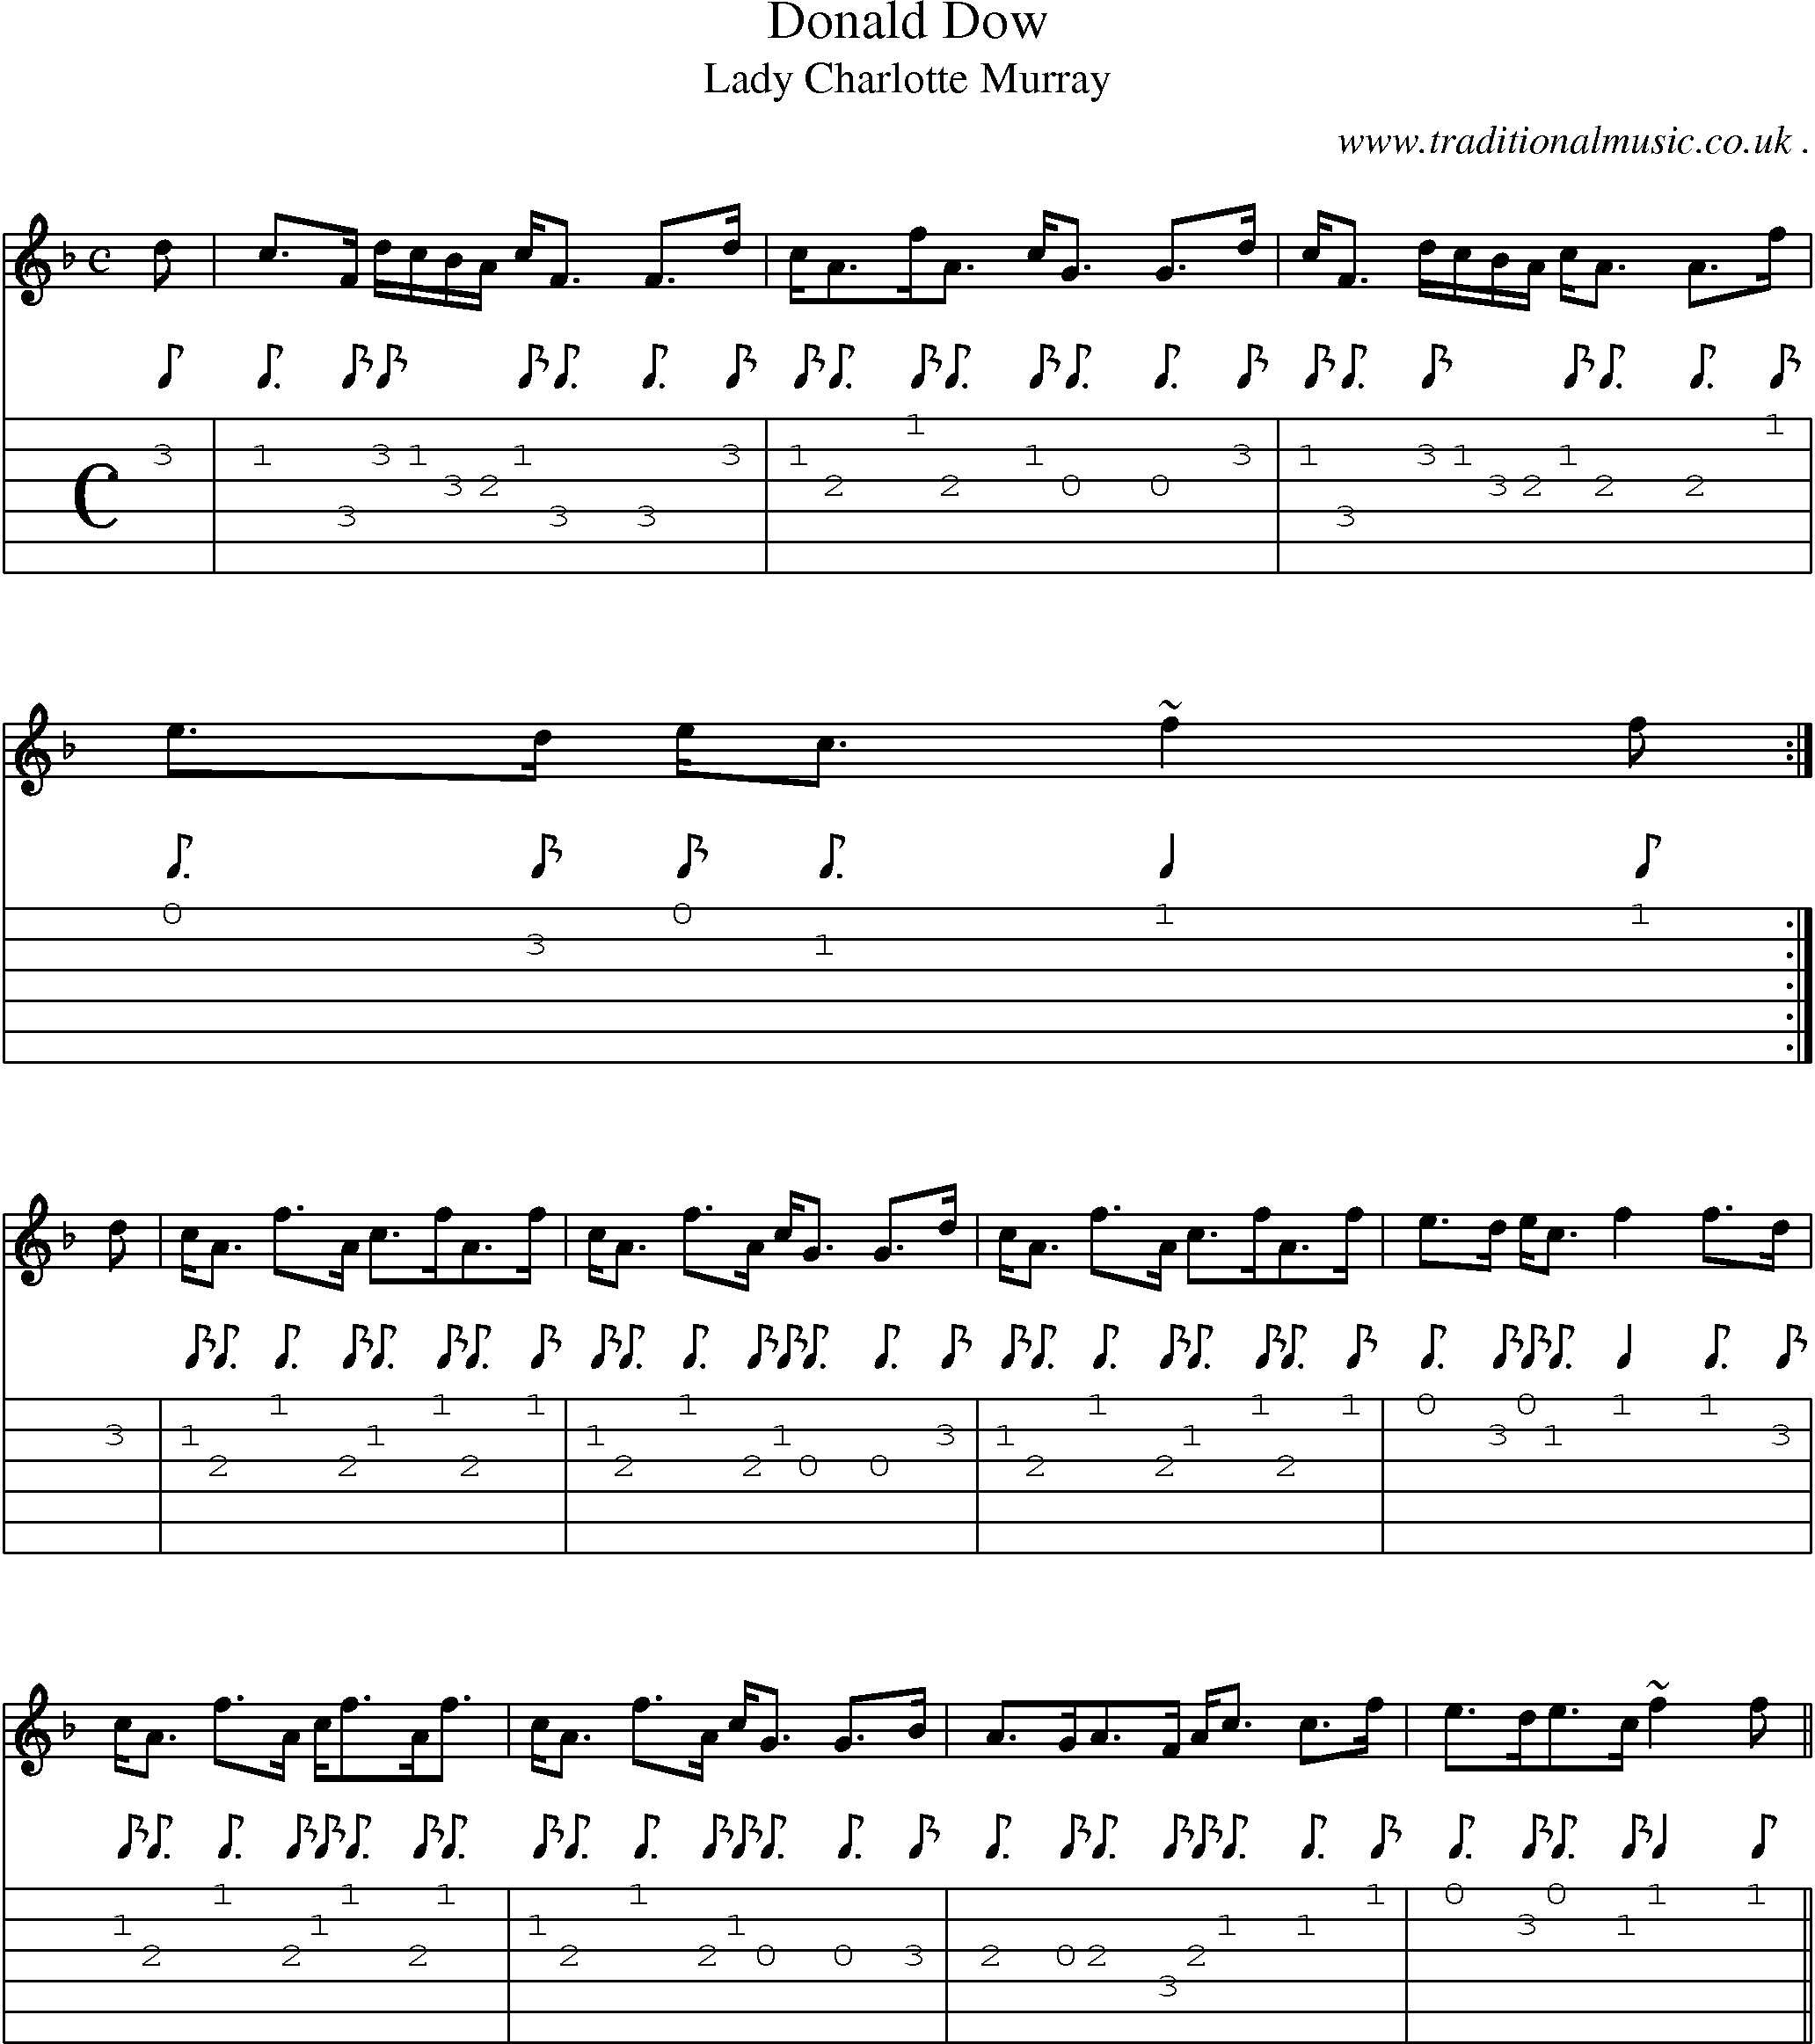 Sheet-music  score, Chords and Guitar Tabs for Donald Dow